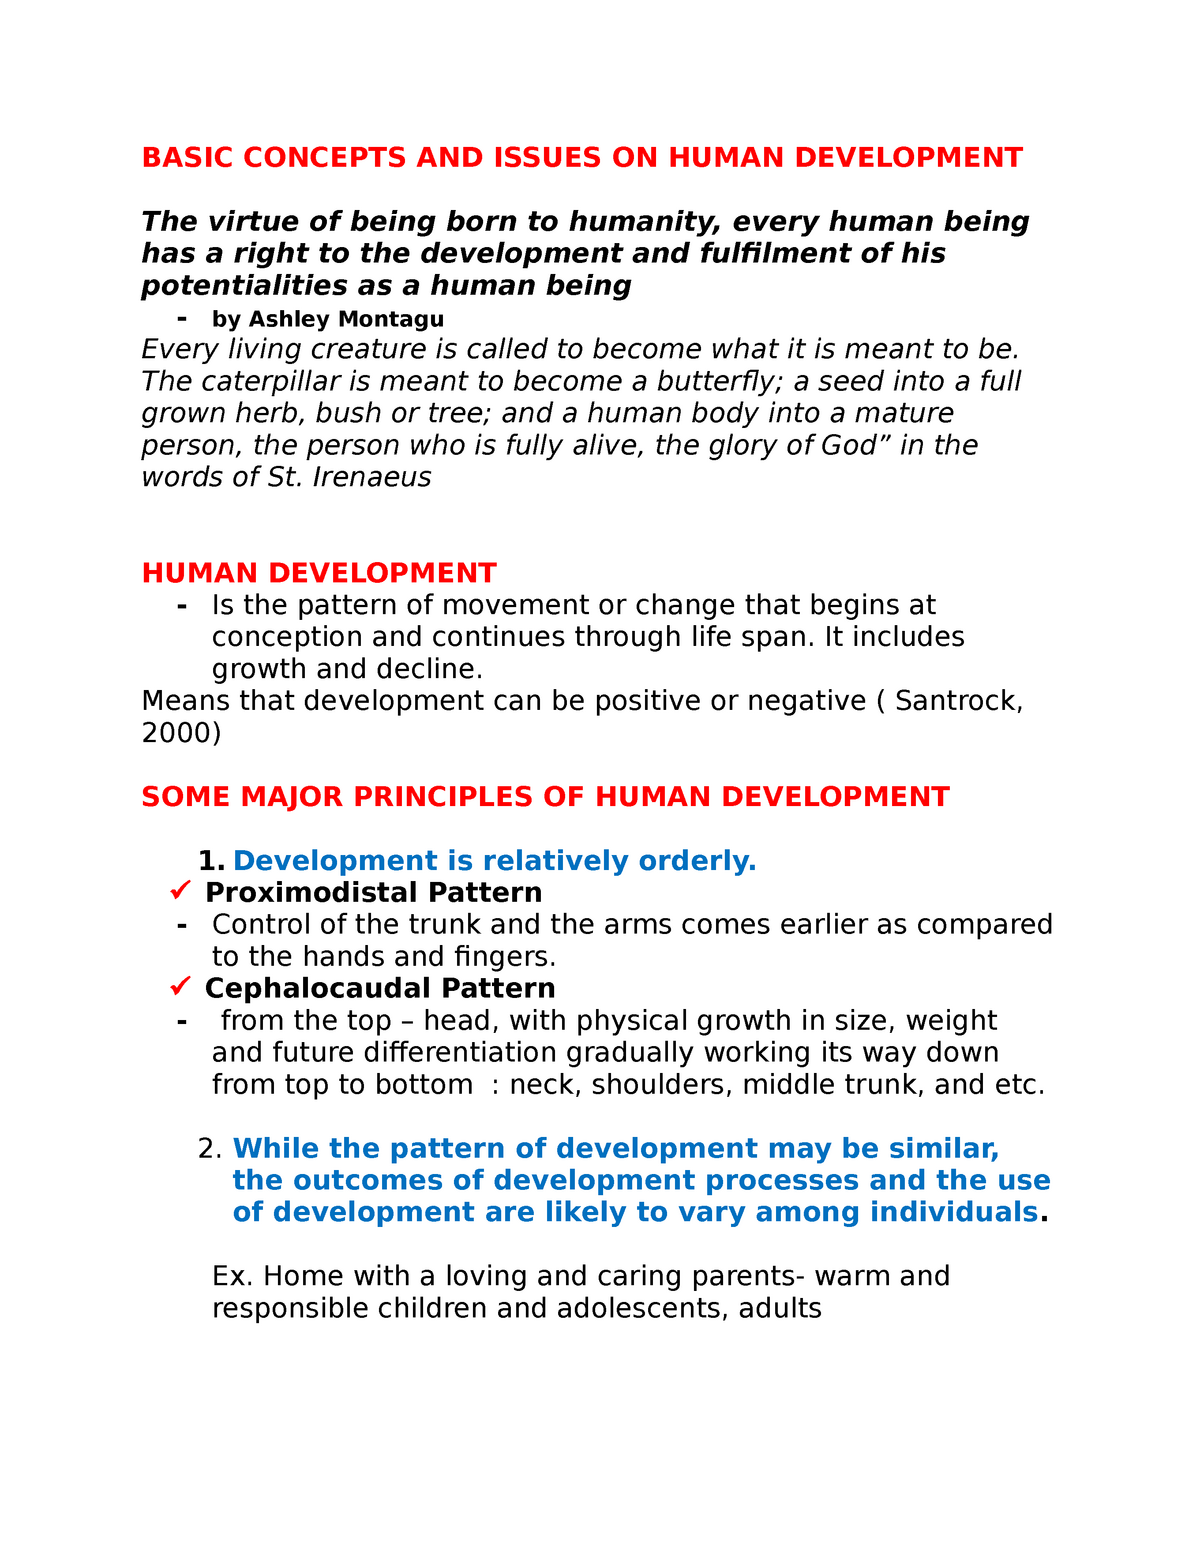 research paper about issues on human development pdf